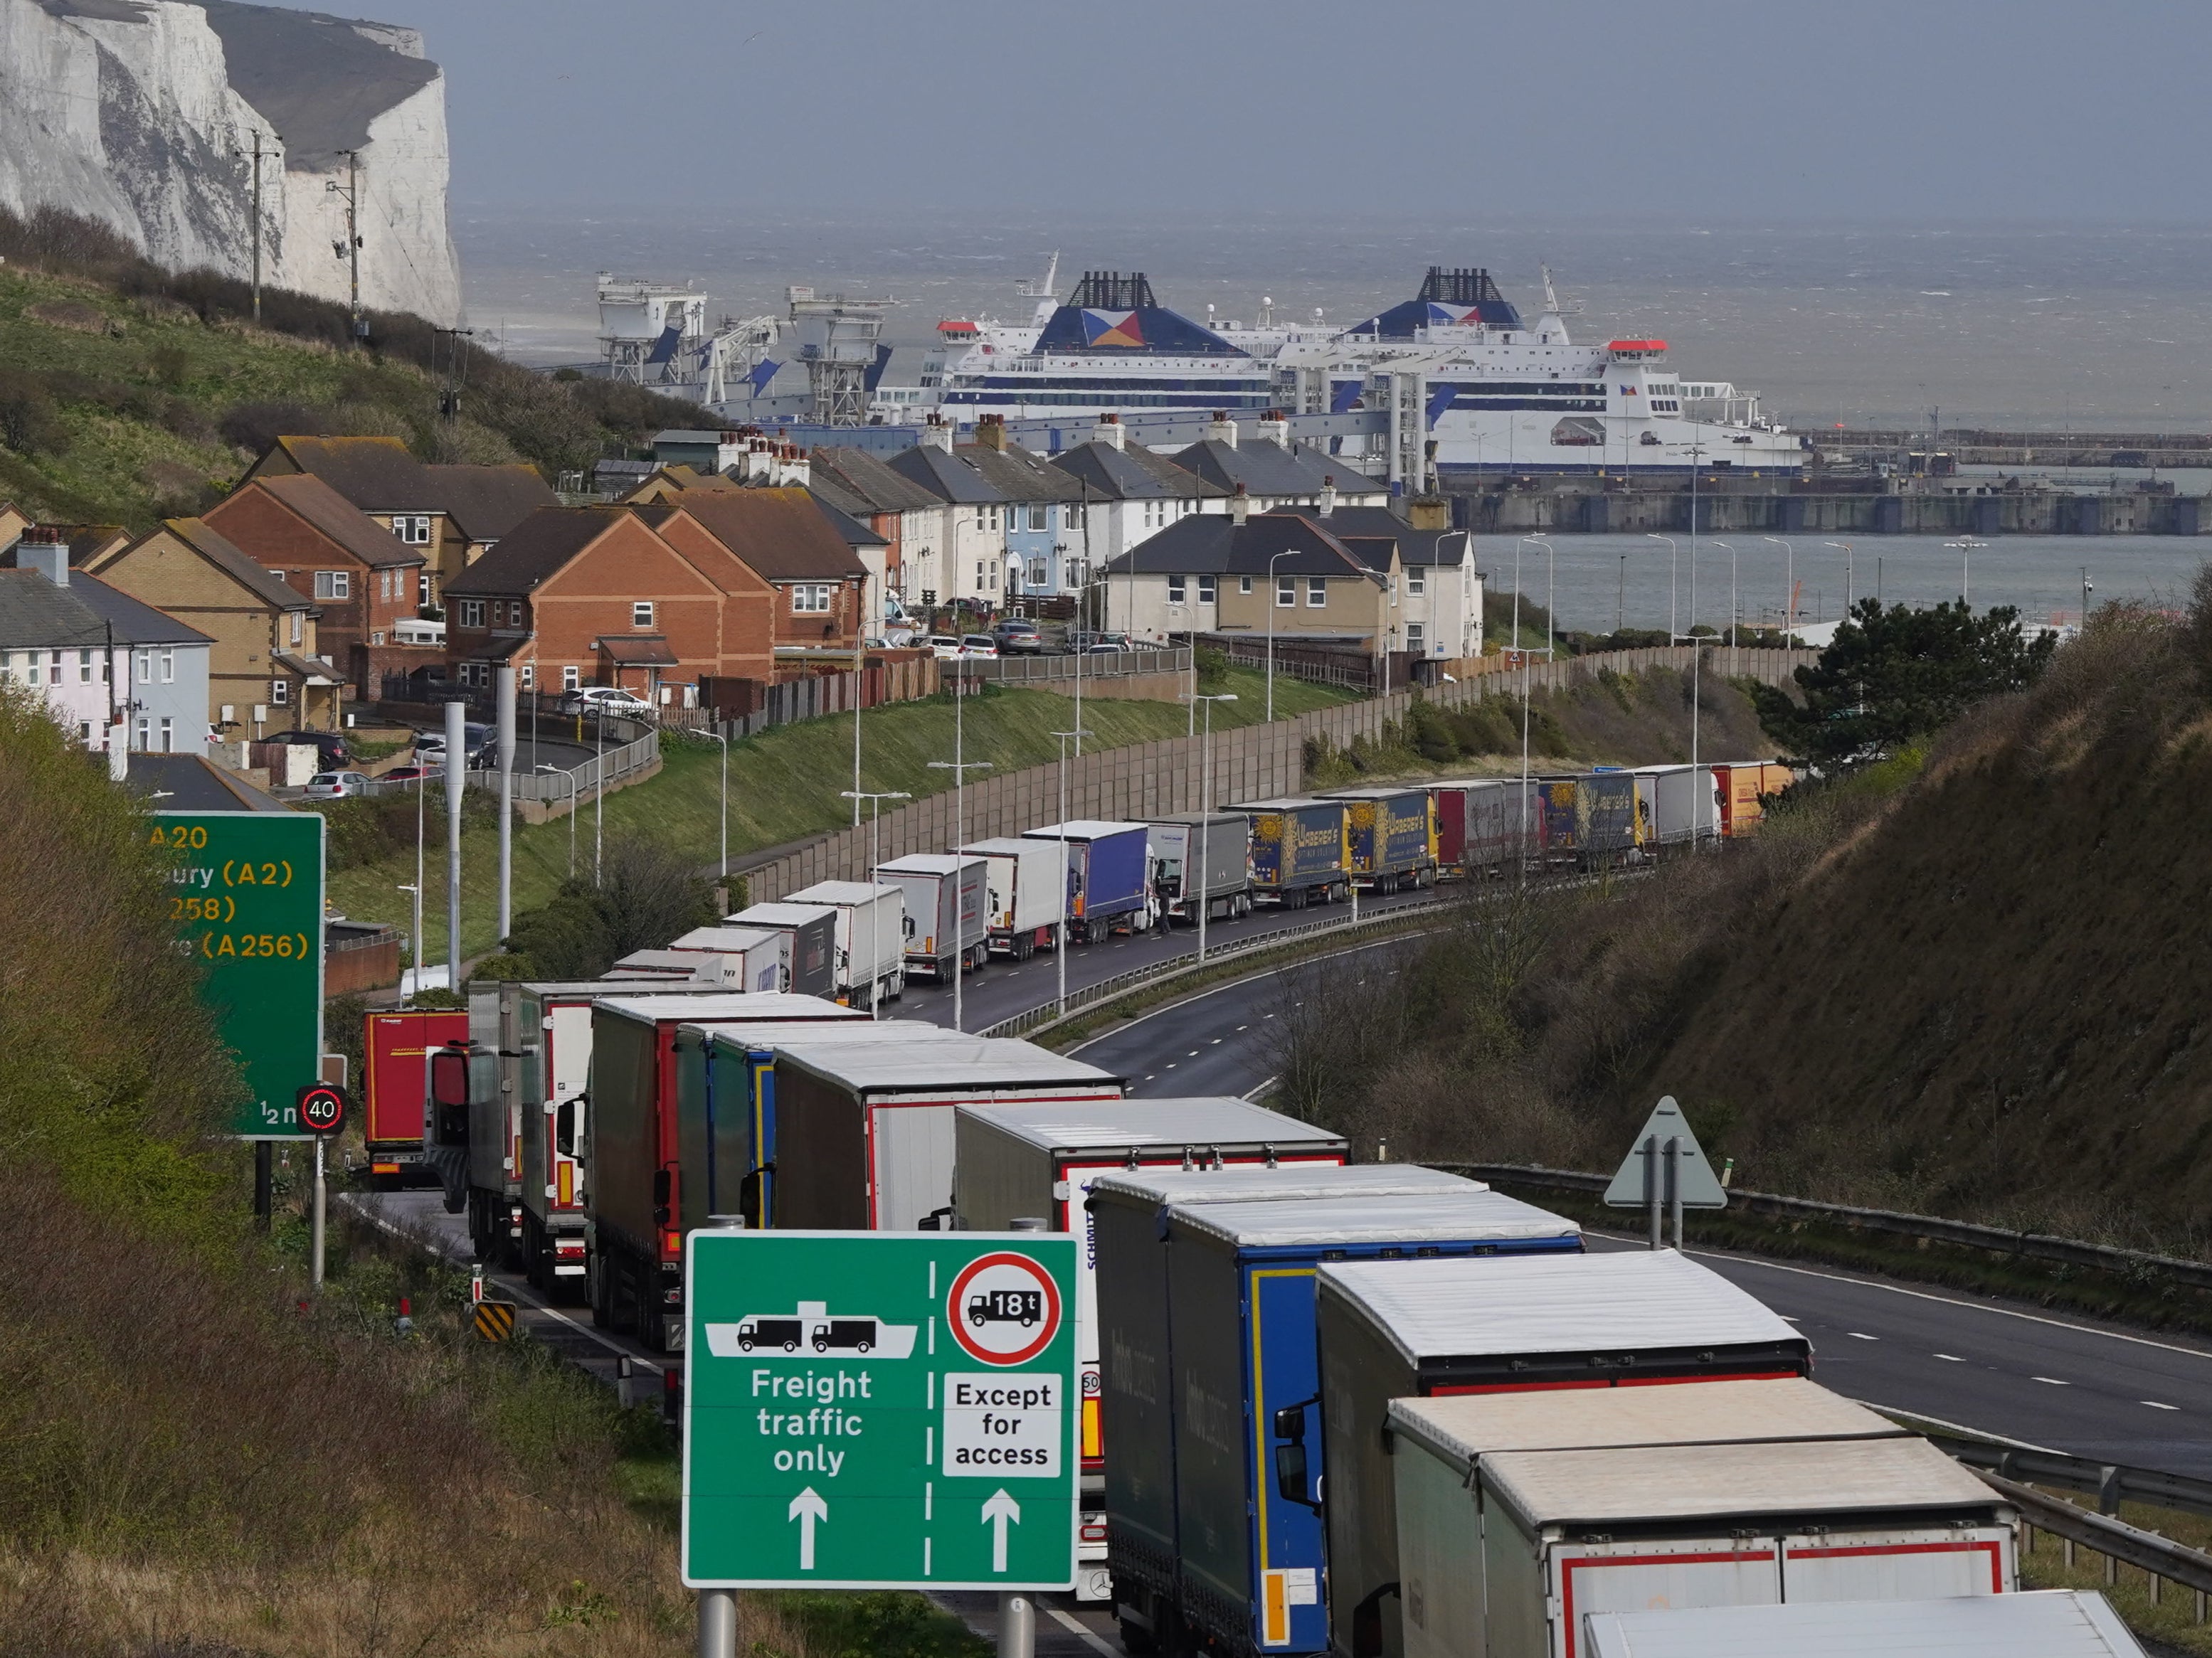 Freight and passenger queues waiting to check in at the Port of Dover